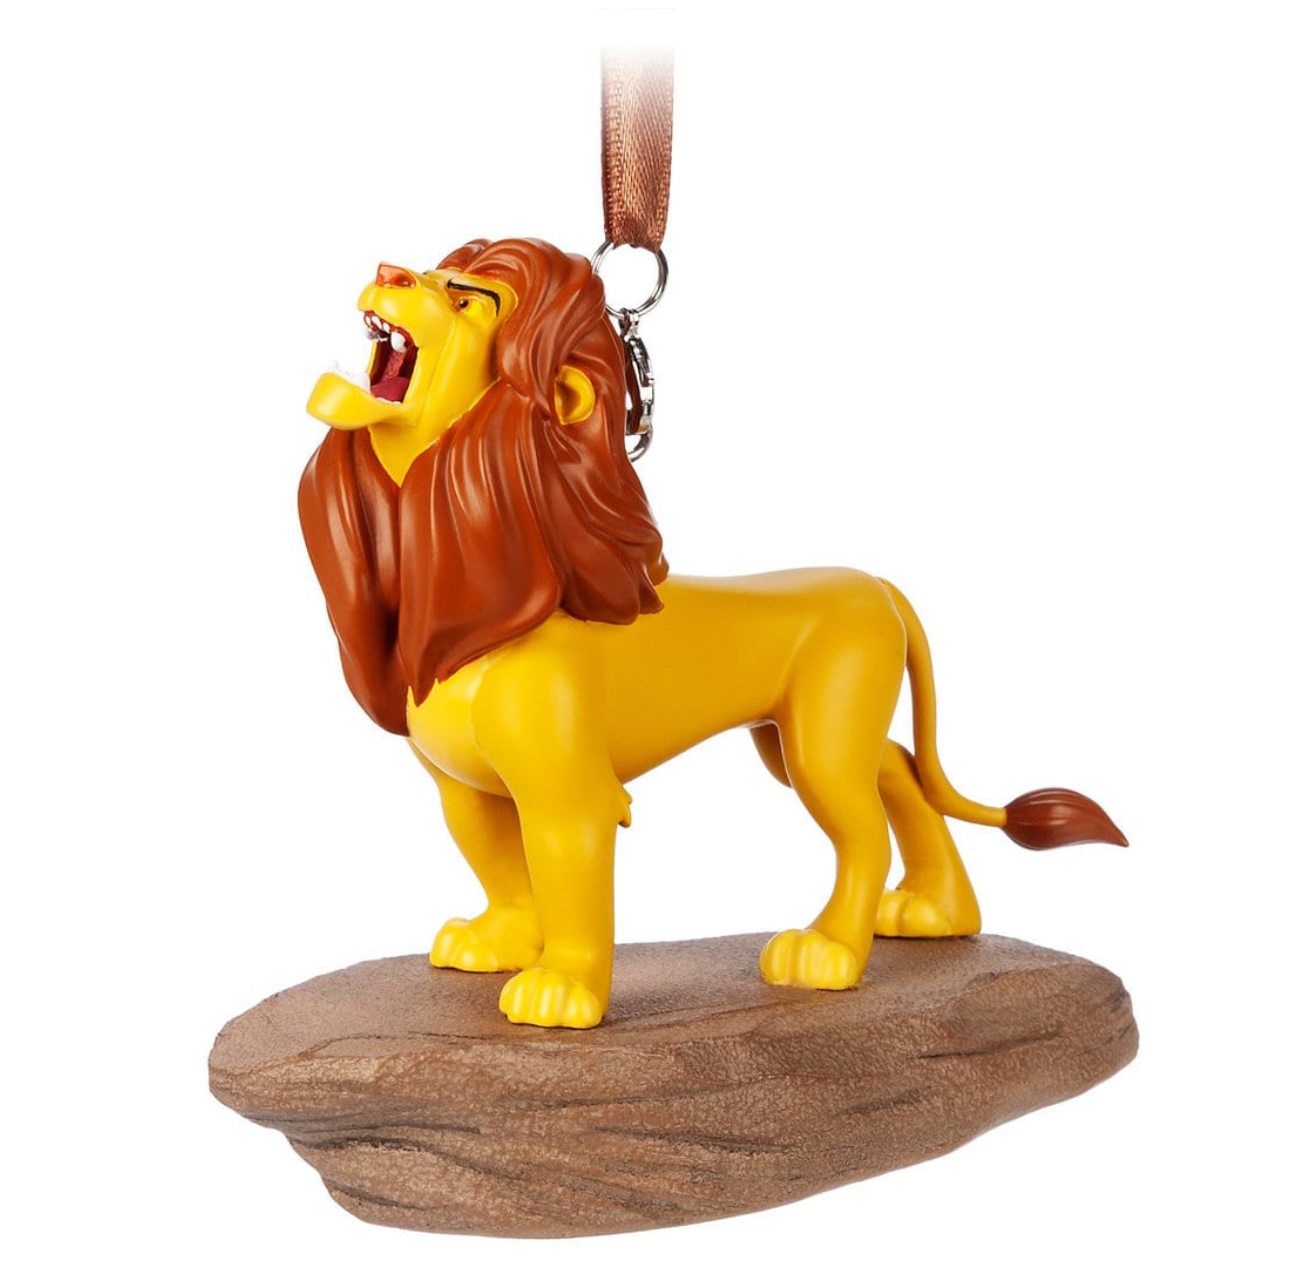 Disney Parks Lion King Simba Long Live The King Christmas Ornament New with Tag